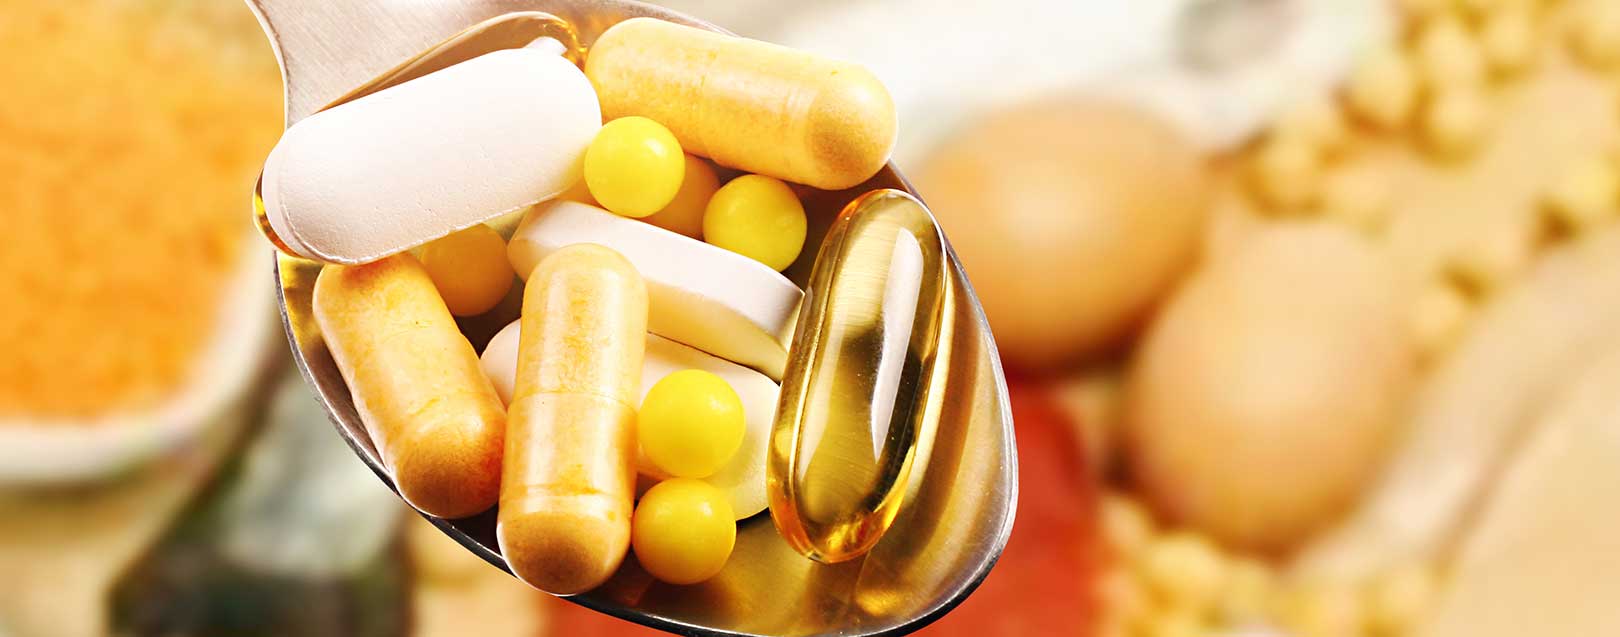 Indian nutraceuticals market to reach $8.5 bn by 2022